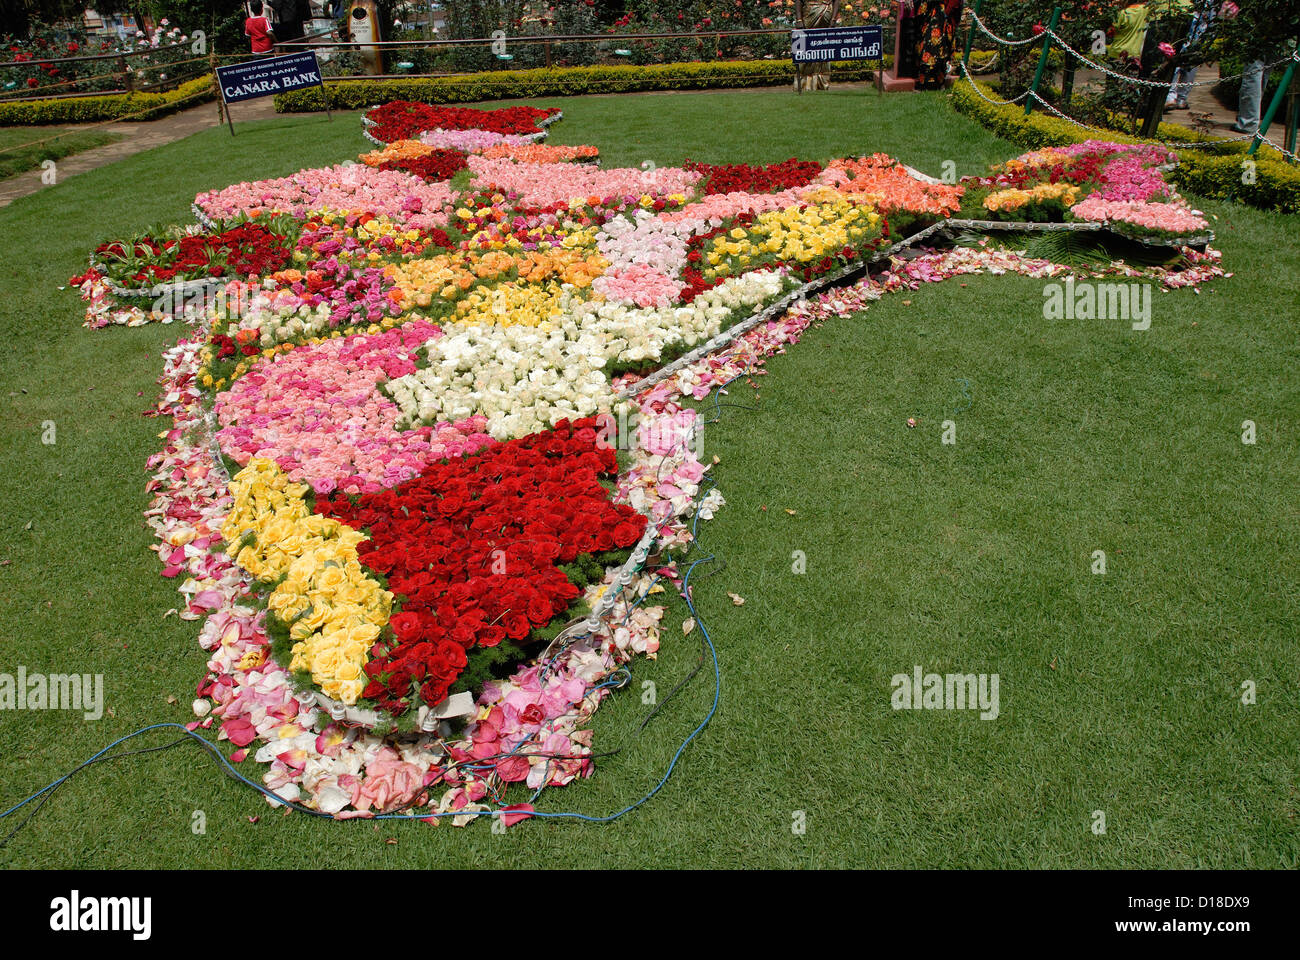 flowers of ooty stock photos & flowers of ooty stock images - alamy